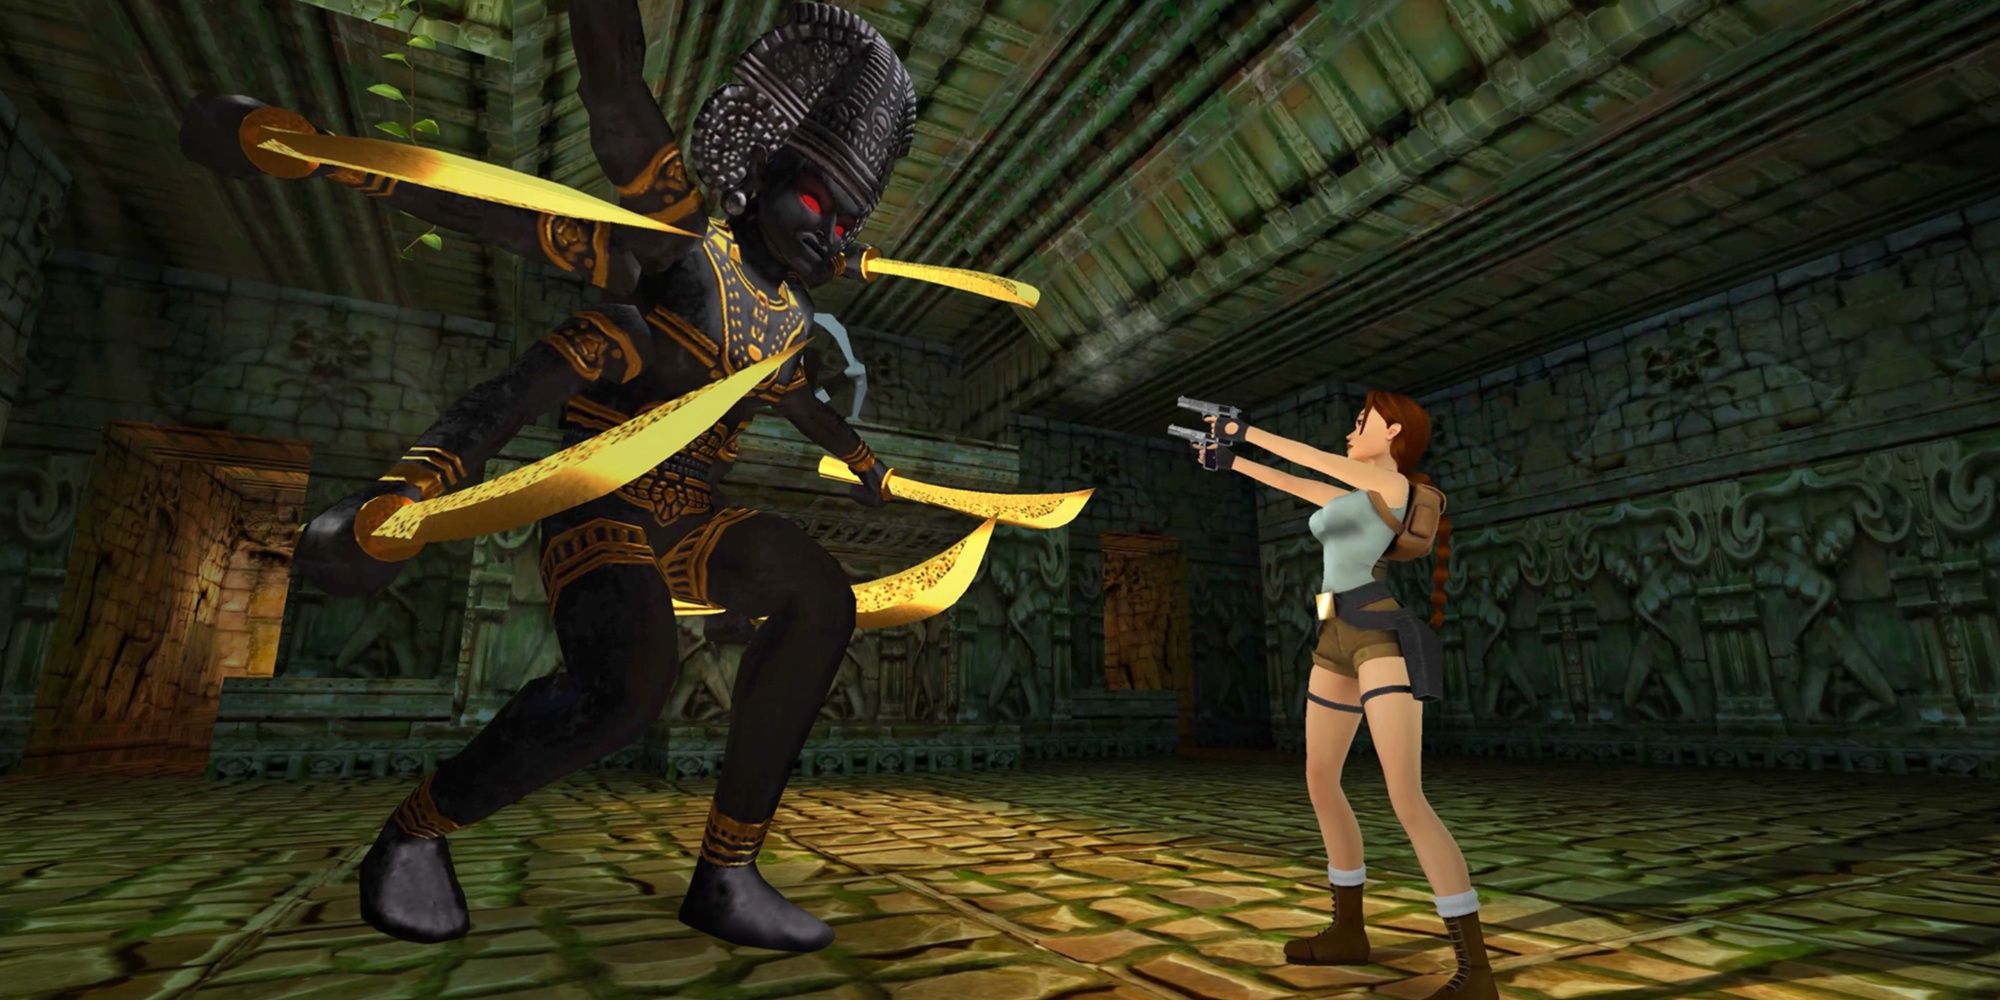 lara croft pointing her guns at a boss in the remastered tomb raider trilogy